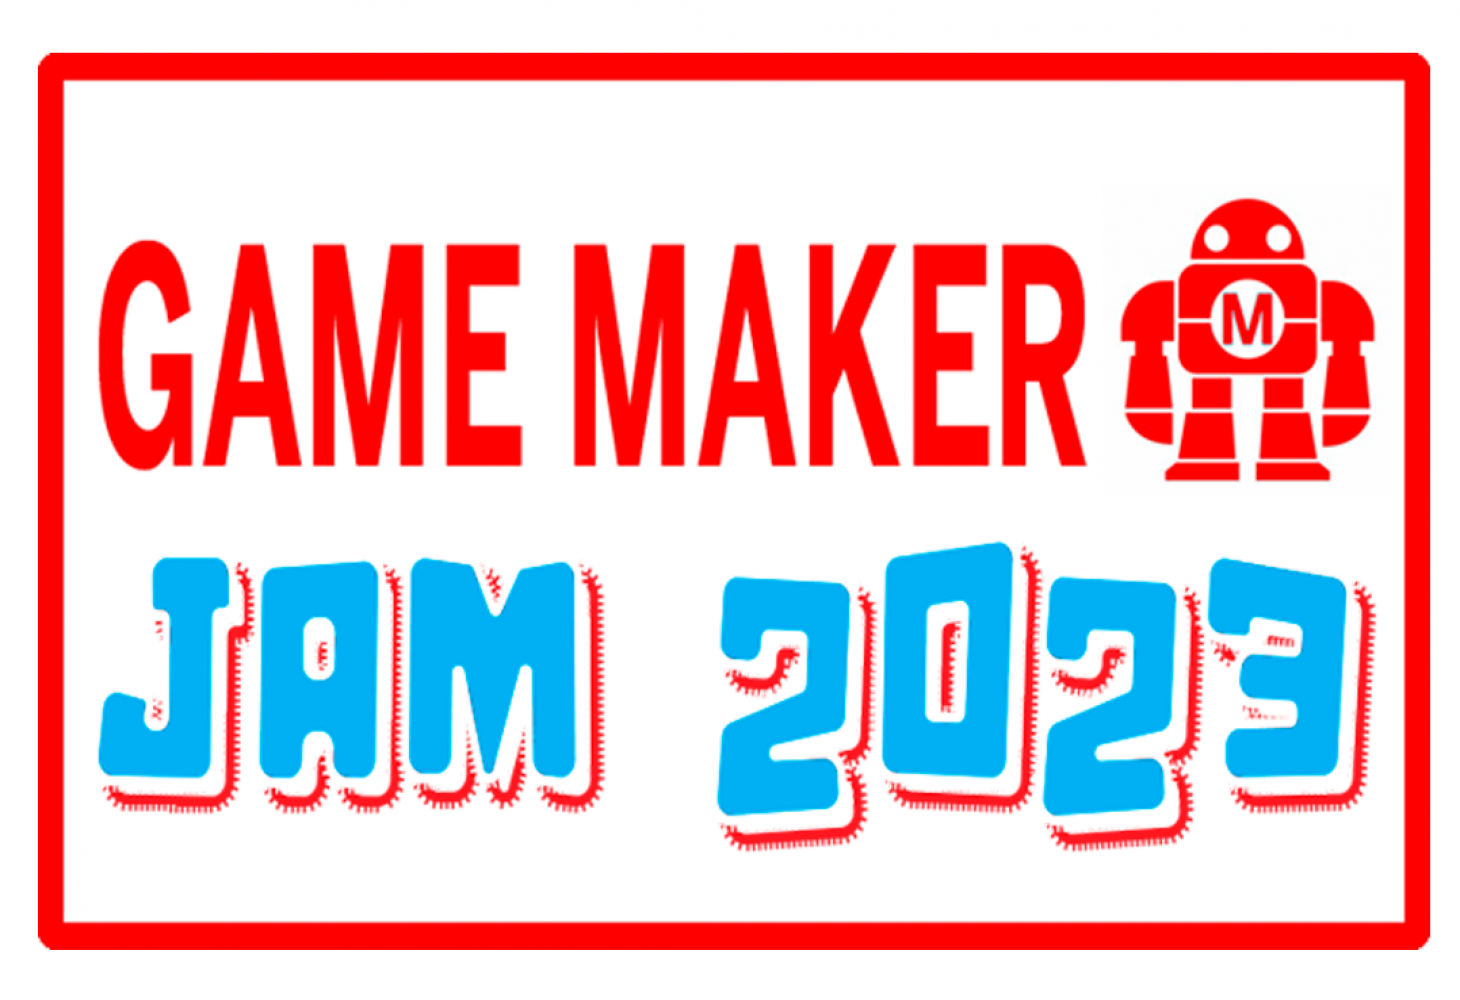 Participate in the 4th Game Maker Jam of the Maker Faire Galicia